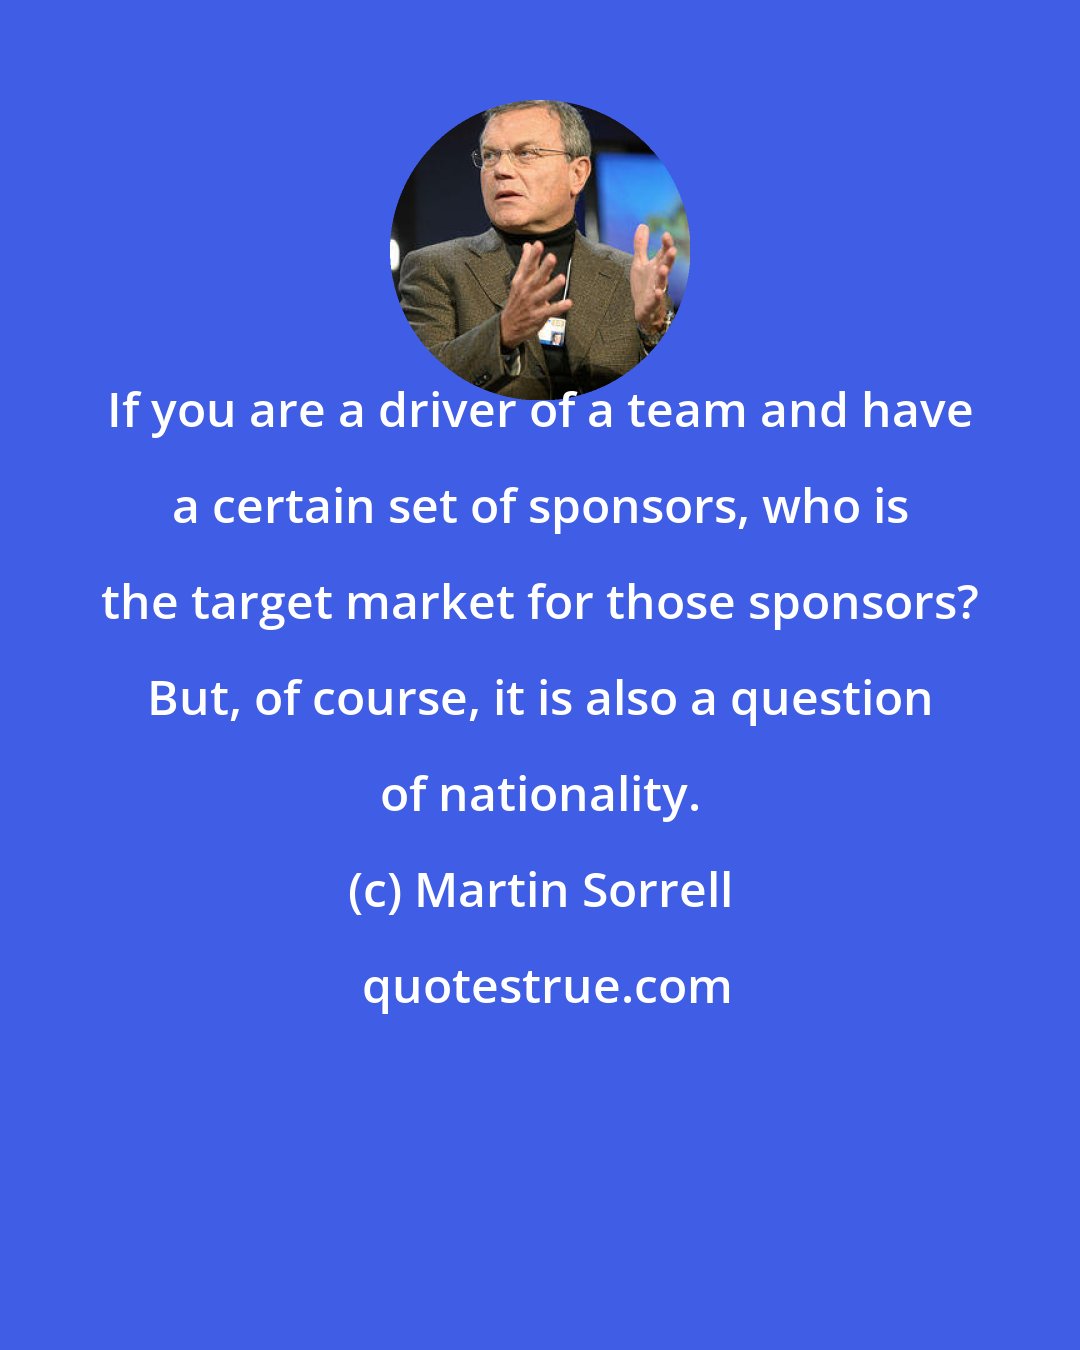 Martin Sorrell: If you are a driver of a team and have a certain set of sponsors, who is the target market for those sponsors? But, of course, it is also a question of nationality.